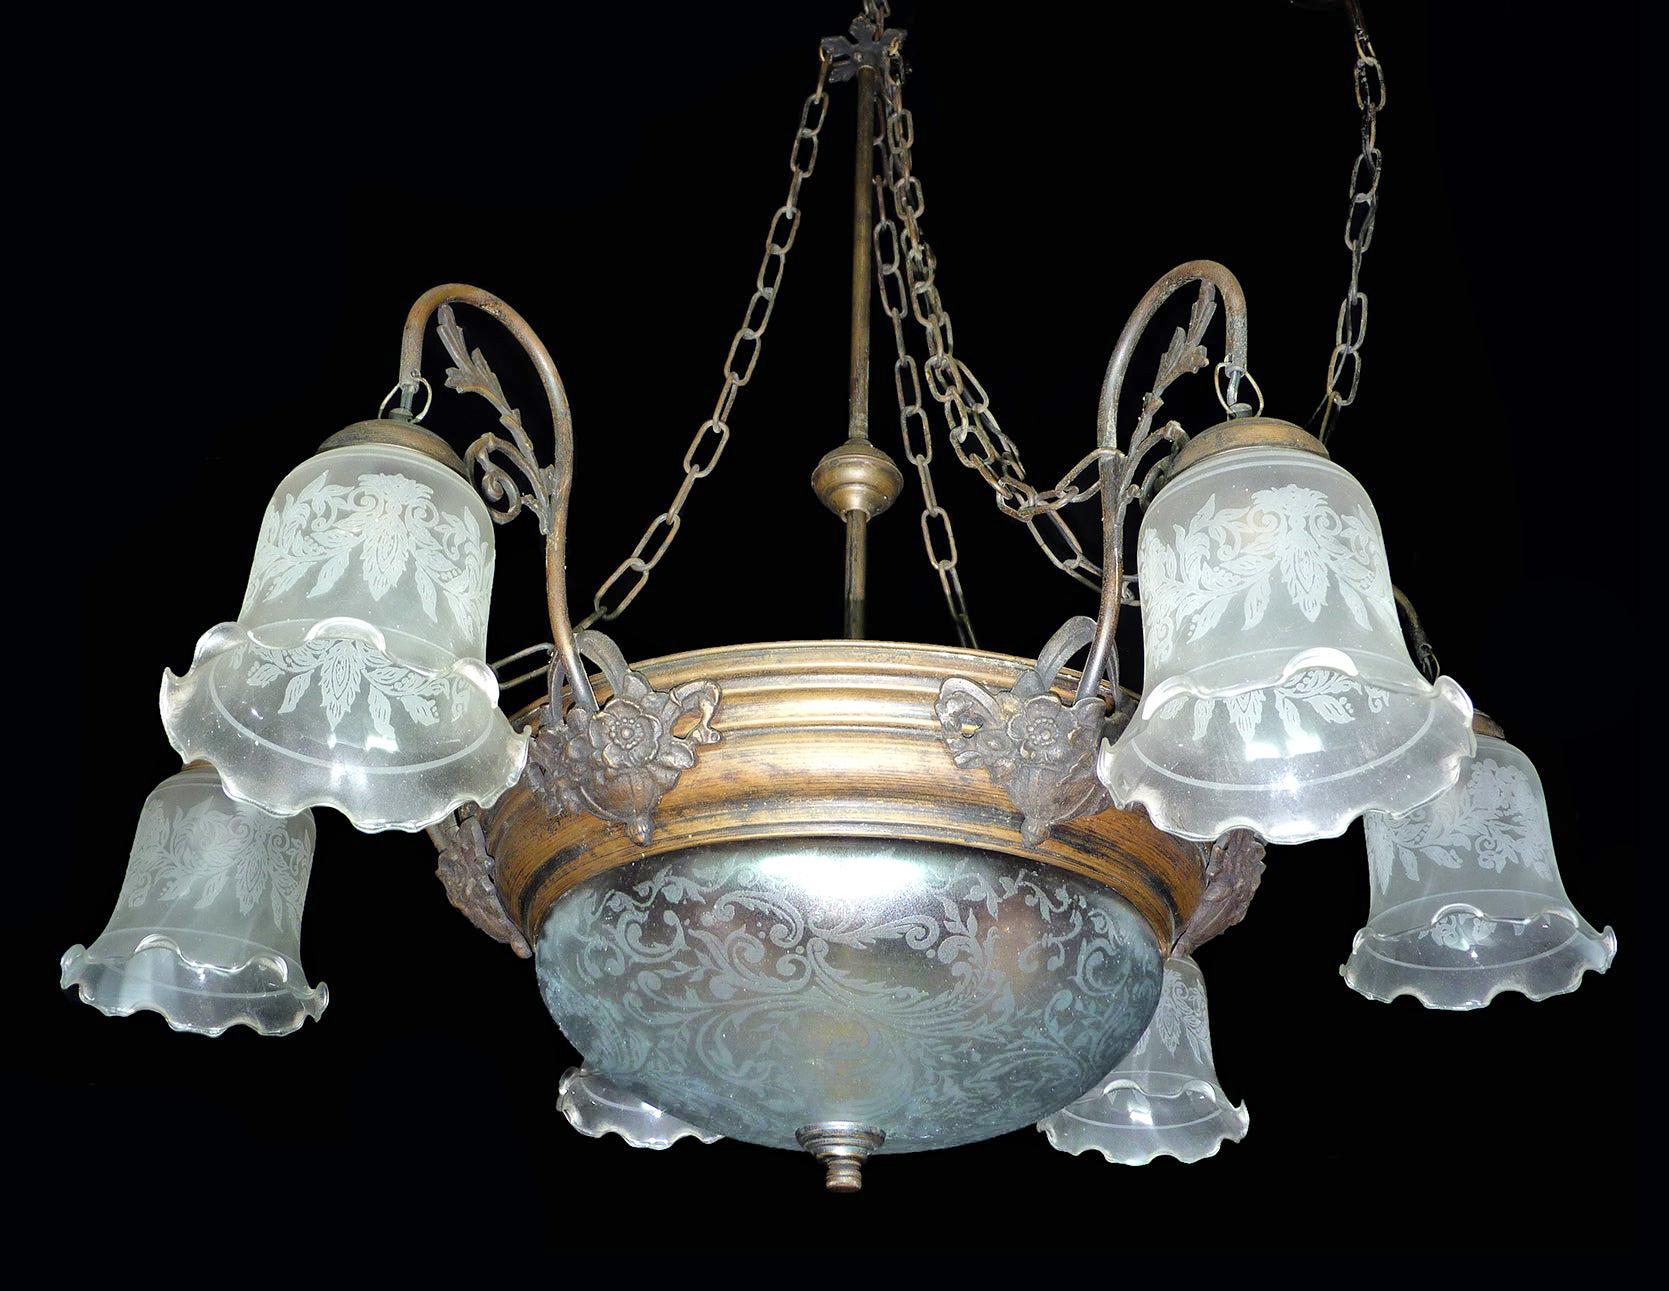 Large French Art Deco and Art Nouveau etched glass, 8-light chandelier or metal with age patina.
8 bulbs (2- E27 + 6 - E 14) 60W - porcelain sockets
Good working condition 
Measures: Diameter 30 in / 76 cm
Height 75 in / 76 cm + (30 in + 47.2